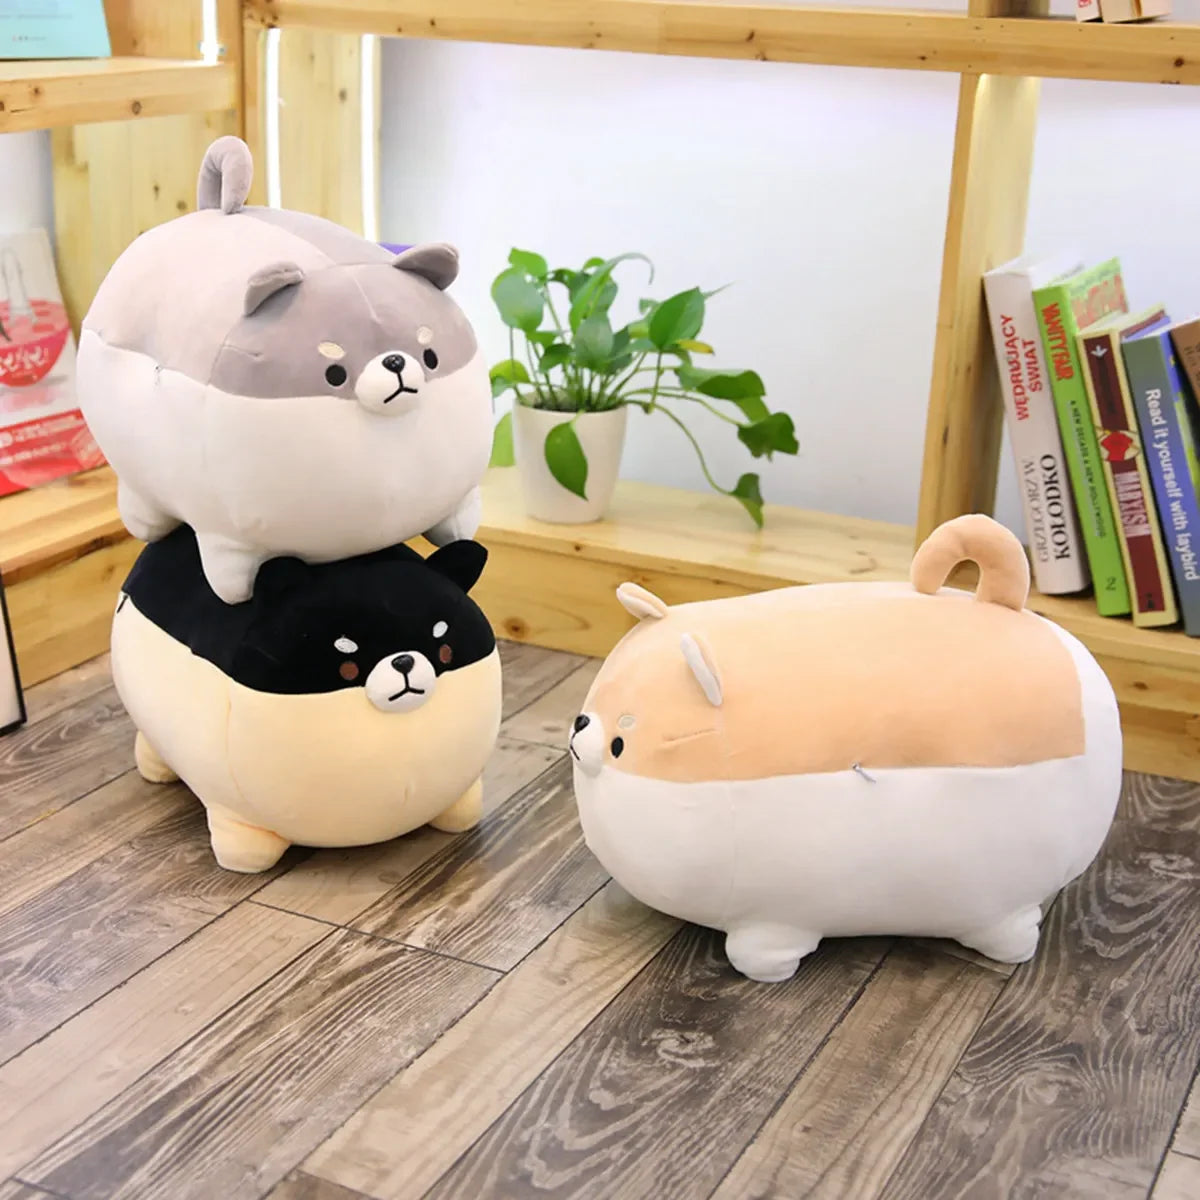 Cuddle Up With Cuteness: Introducing the Adorable Shiba Inu Plush Toy! - Rexpect Nerd